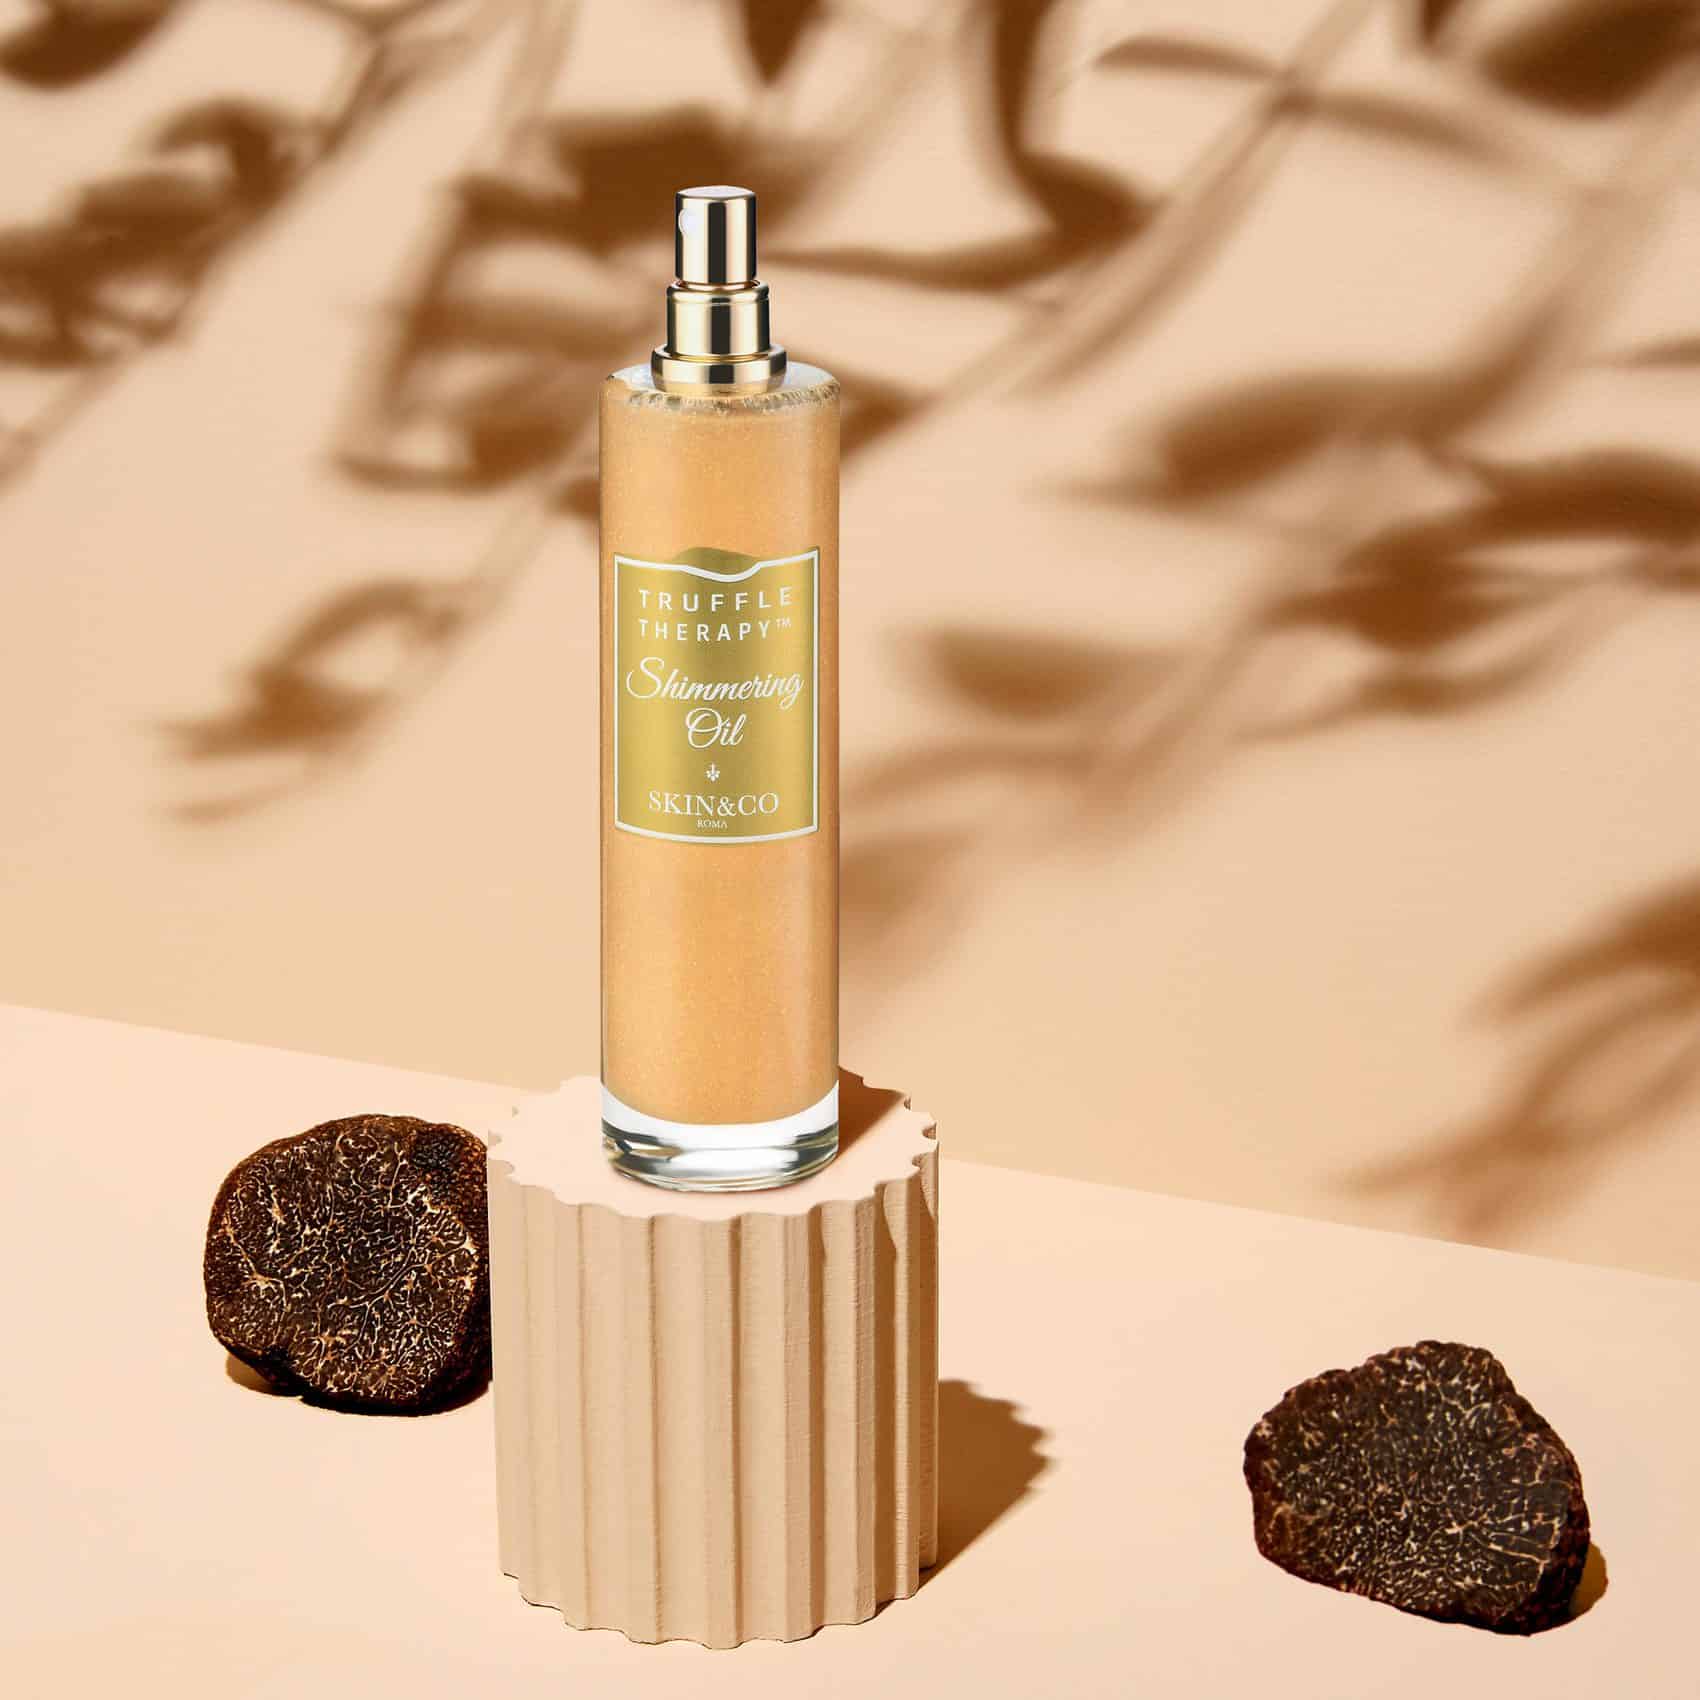 https://fashionweekdaily.com/wp-content/uploads/2020/09/SKINCO-Truffle-Therapy-Shimmering-Oil_Limited-Edition-scaled.jpg